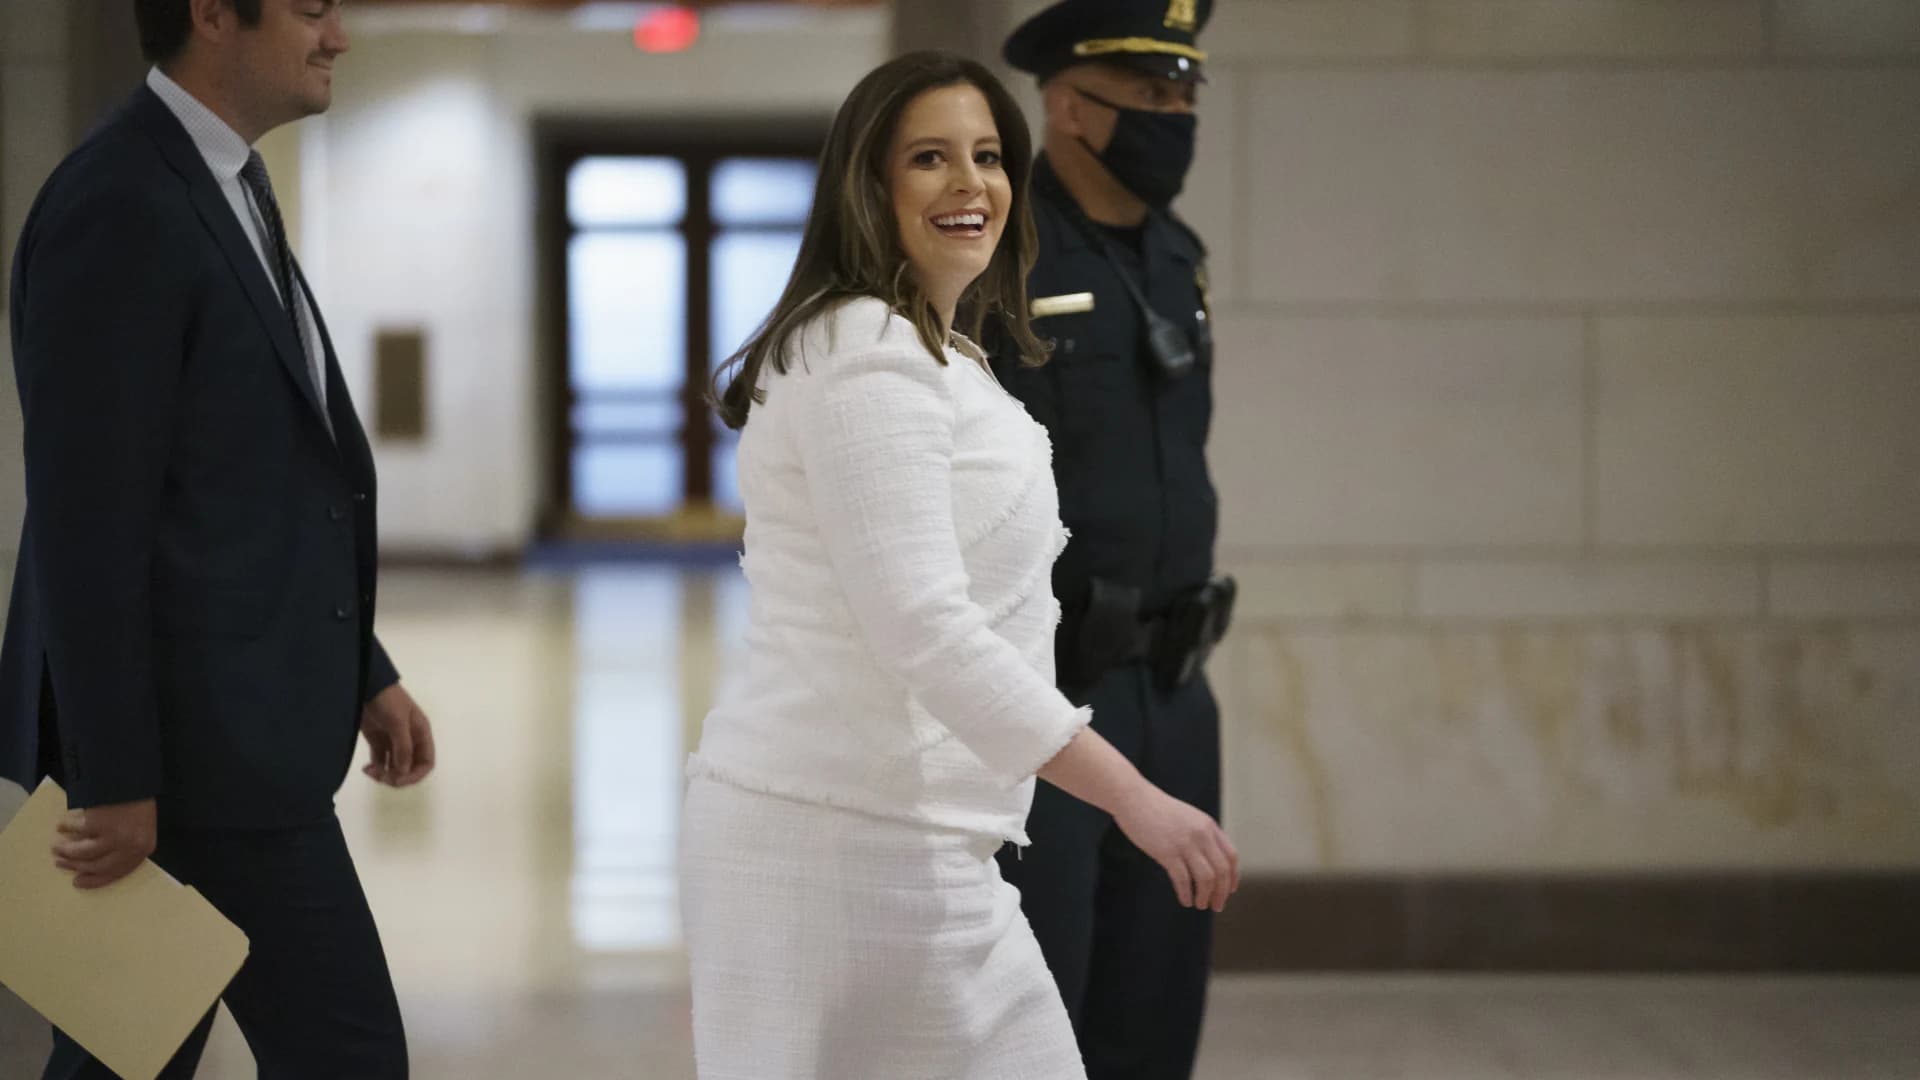 House GOP elects Rep. Elise Stefanik (R-NY) to No. 3 leadership post to replace Rep. Liz Cheney